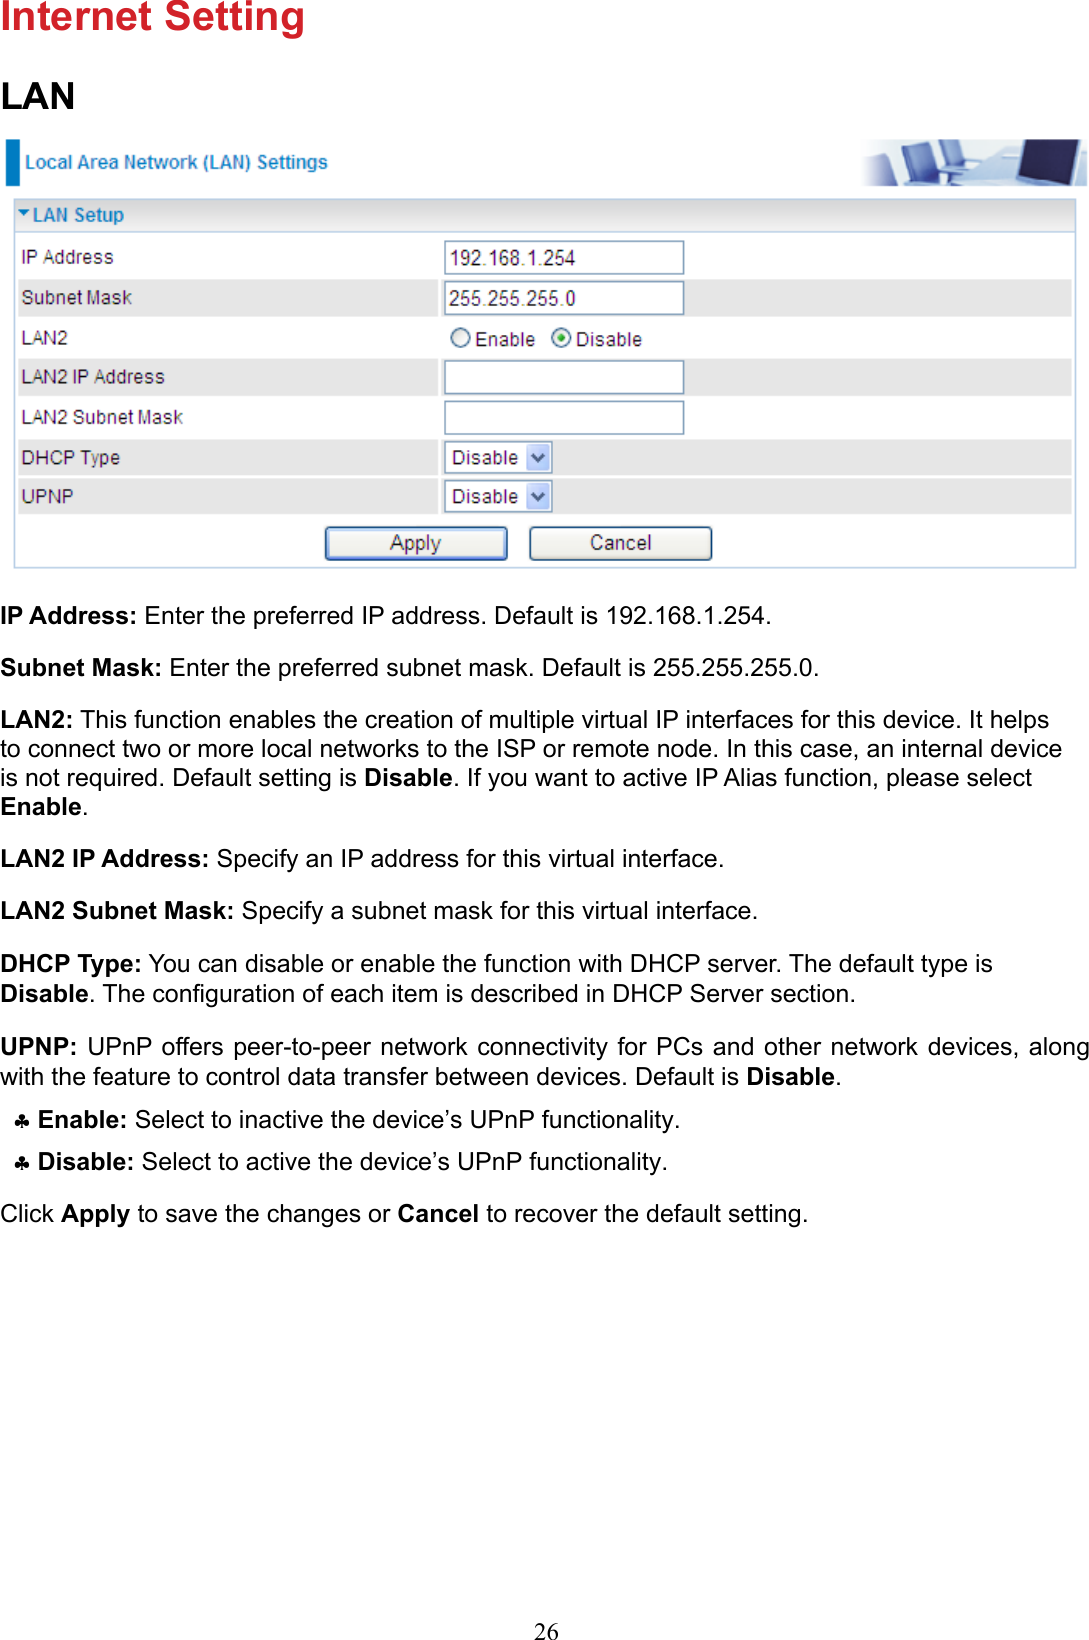 26Internet SettingLANIP Address: Enter the preferred IP address. Default is 192.168.1.254.Subnet Mask: Enter the preferred subnet mask. Default is 255.255.255.0.LAN2: This function enables the creation of multiple virtual IP interfaces for this device. It helps to connect two or more local networks to the ISP or remote node. In this case, an internal device is not required. Default setting is Disable. If you want to active IP Alias function, please select Enable.LAN2 IP Address: Specify an IP address for this virtual interface.LAN2 Subnet Mask: Specify a subnet mask for this virtual interface.DHCP Type: You can disable or enable the function with DHCP server. The default type is Disable. The conguration of each item is described in DHCP Server section.UPNP: UPnP offers peer-to-peer network  connectivity  for PCs and other network  devices, along with the feature to control data transfer between devices. Default is Disable.Enable: ♣ Select to inactive the device’s UPnP functionality.Disable:  ♣Select to active the device’s UPnP functionality. Click Apply to save the changes or Cancel to recover the default setting.